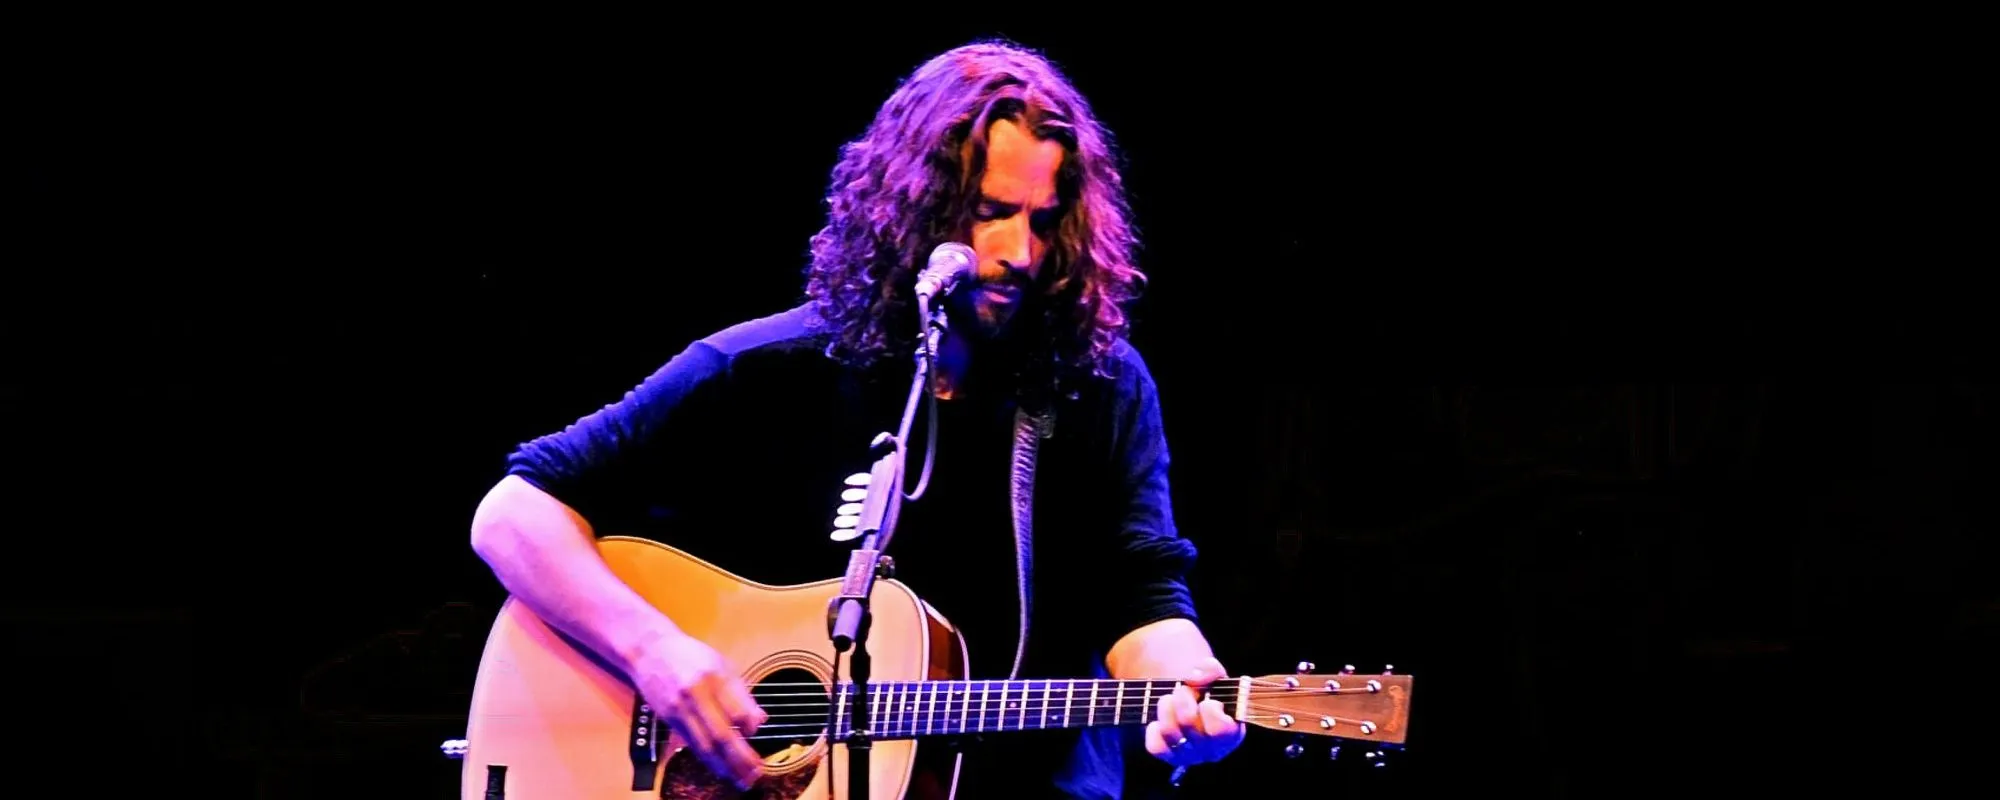 Chris Cornell’s Daughter Toni Pays Tribute to Her Late Father with Moving Performance of “Nothing Compares 2 U”